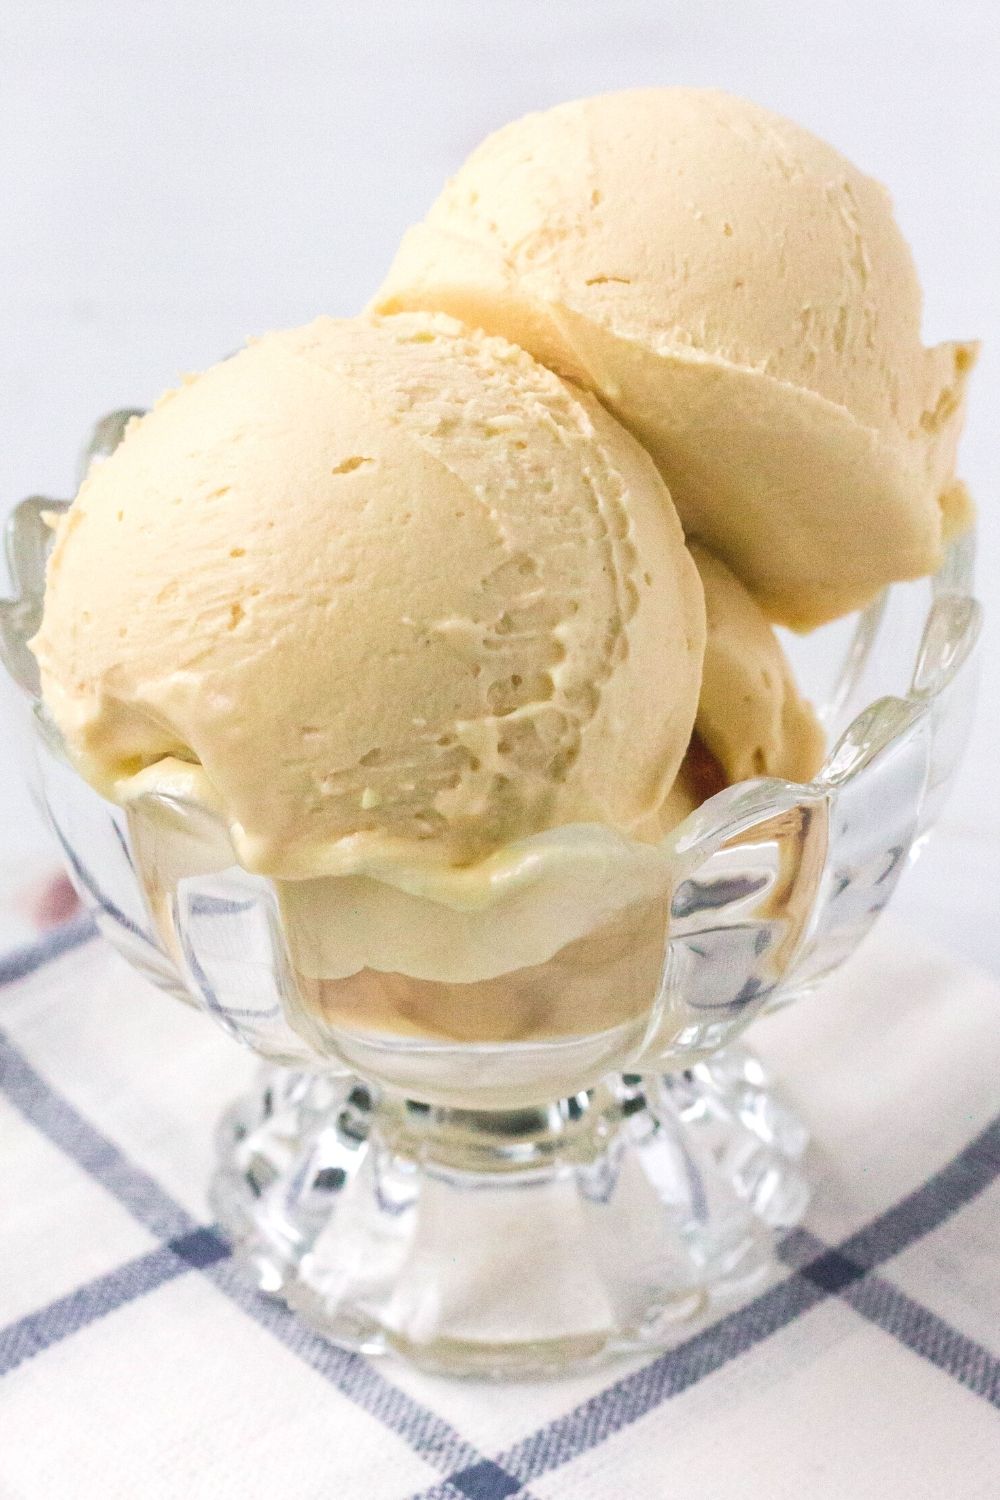 close-up side view of a glass dessert cup serving scoops of peanut butter ice cream made in the Ninja Creami machine.